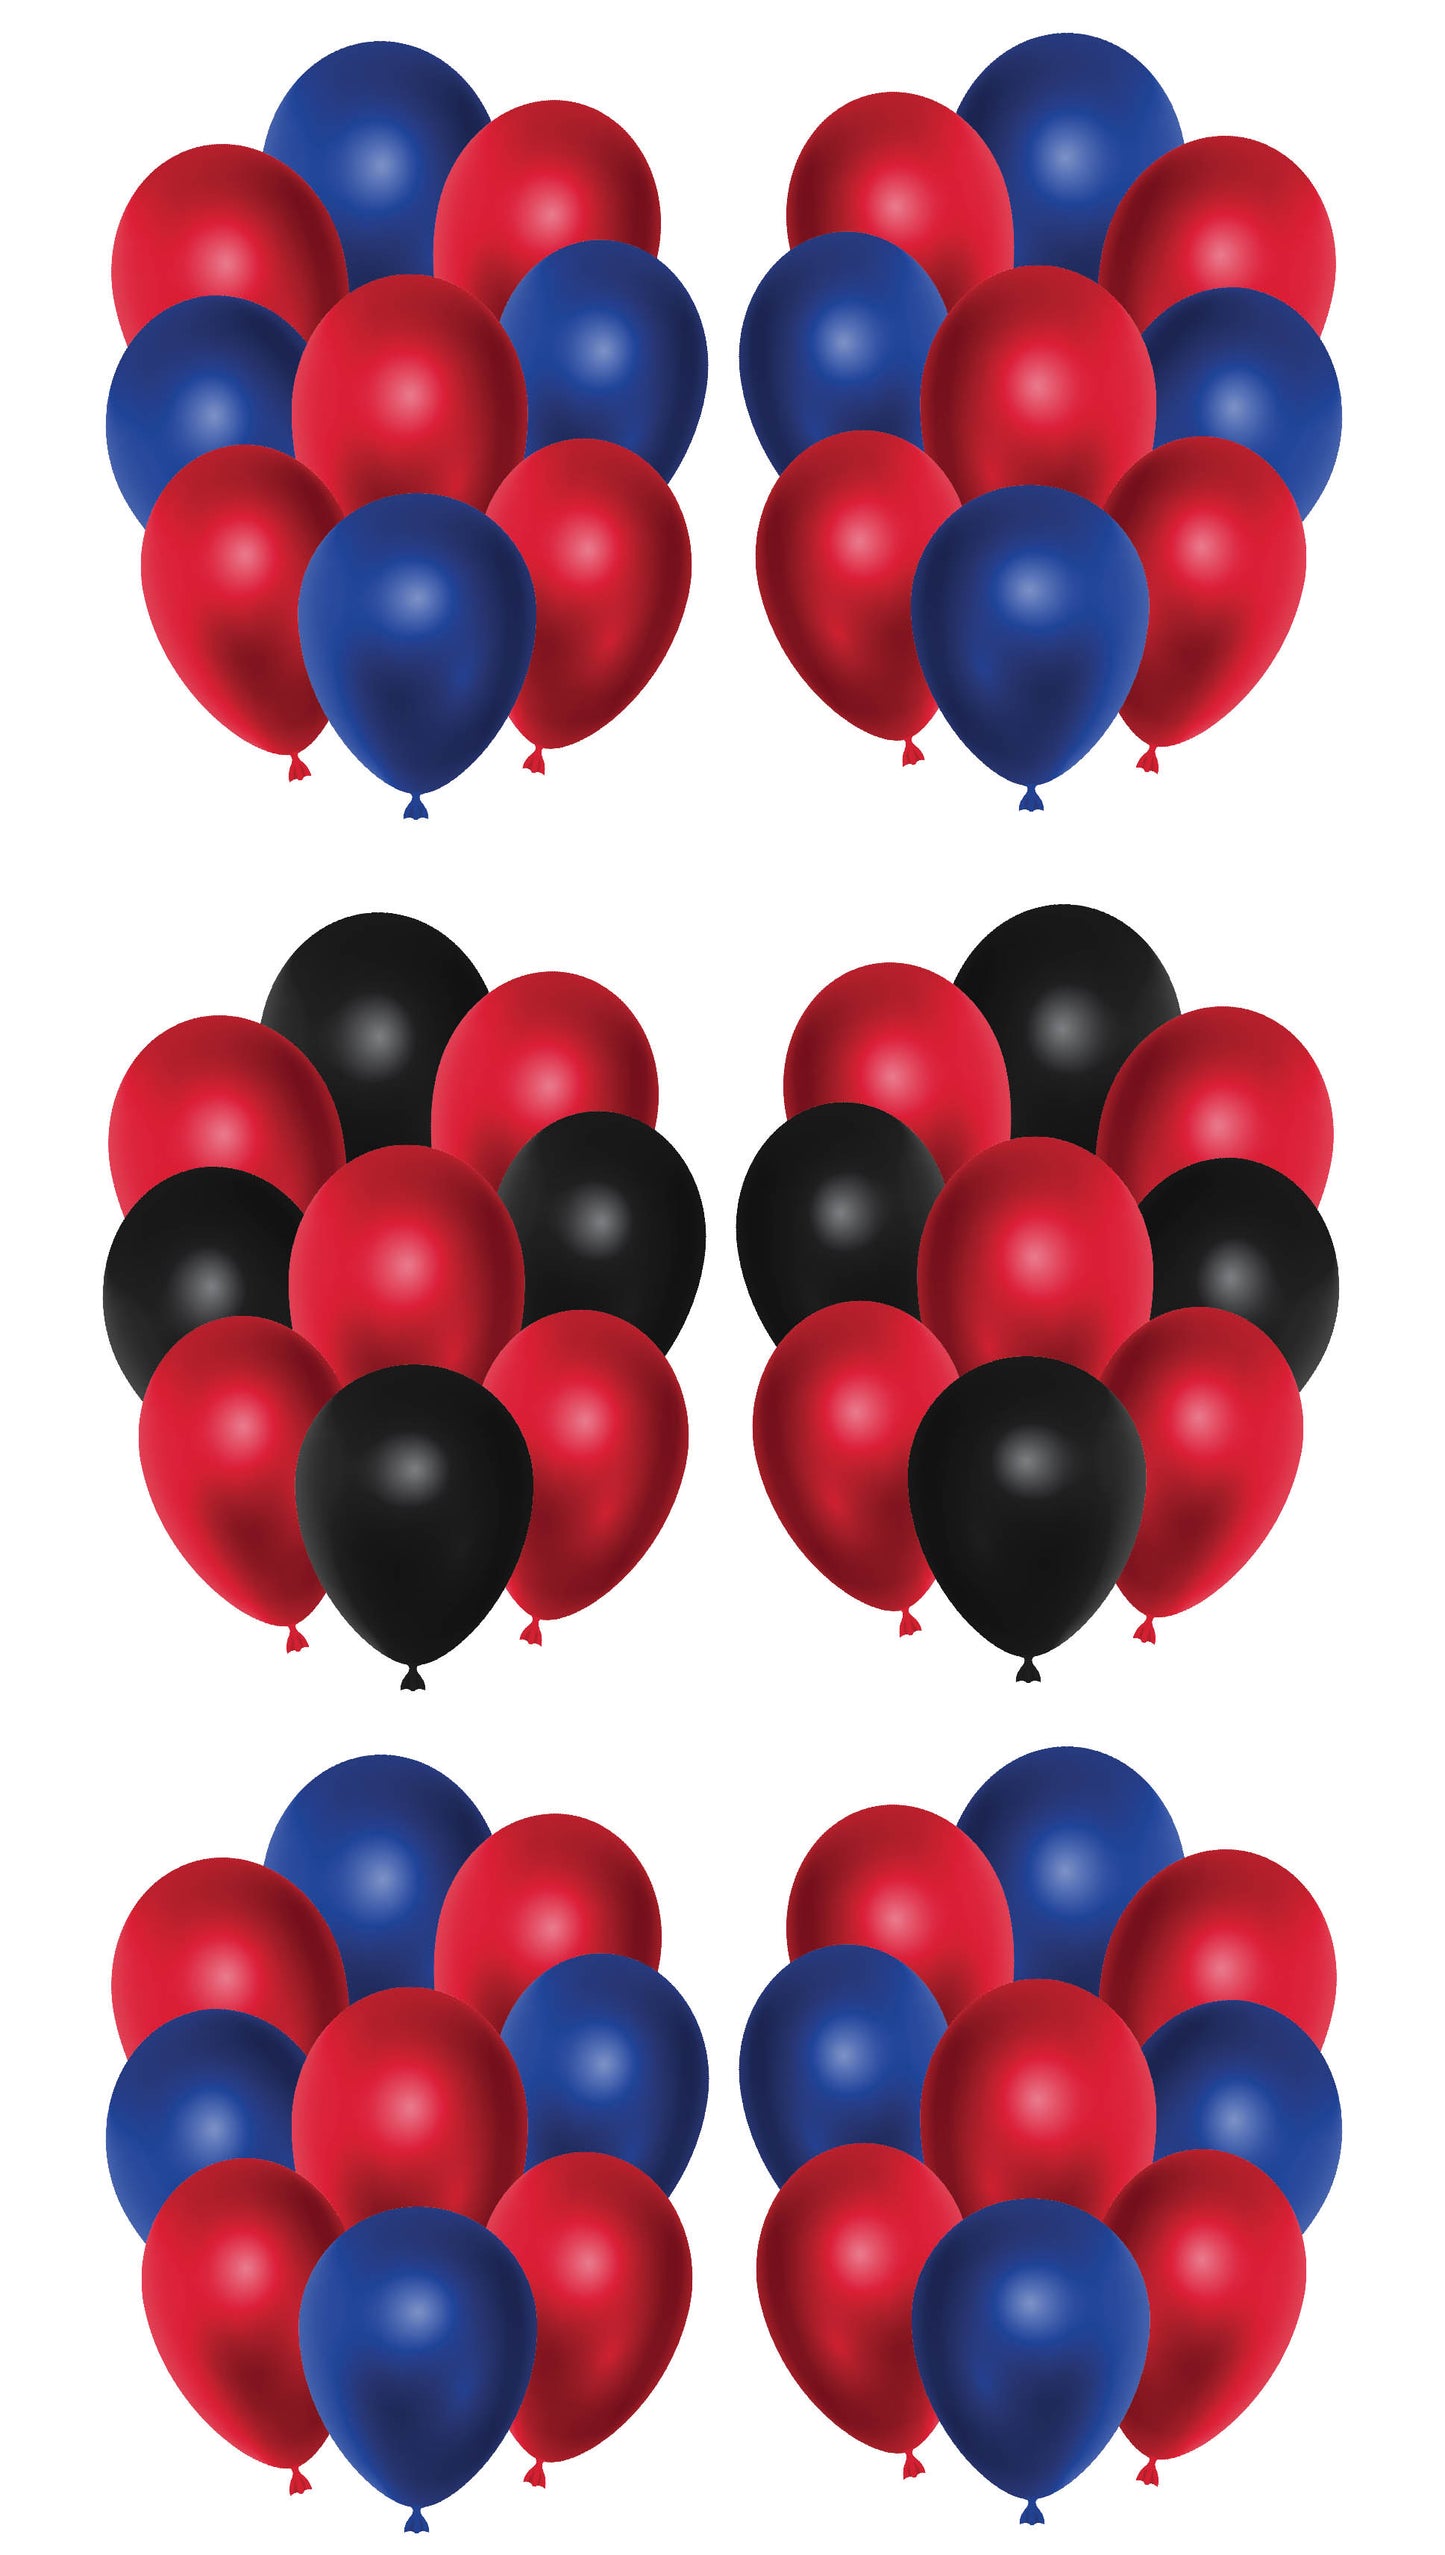 Copy of 3 Sets of Balloon Bunches 13